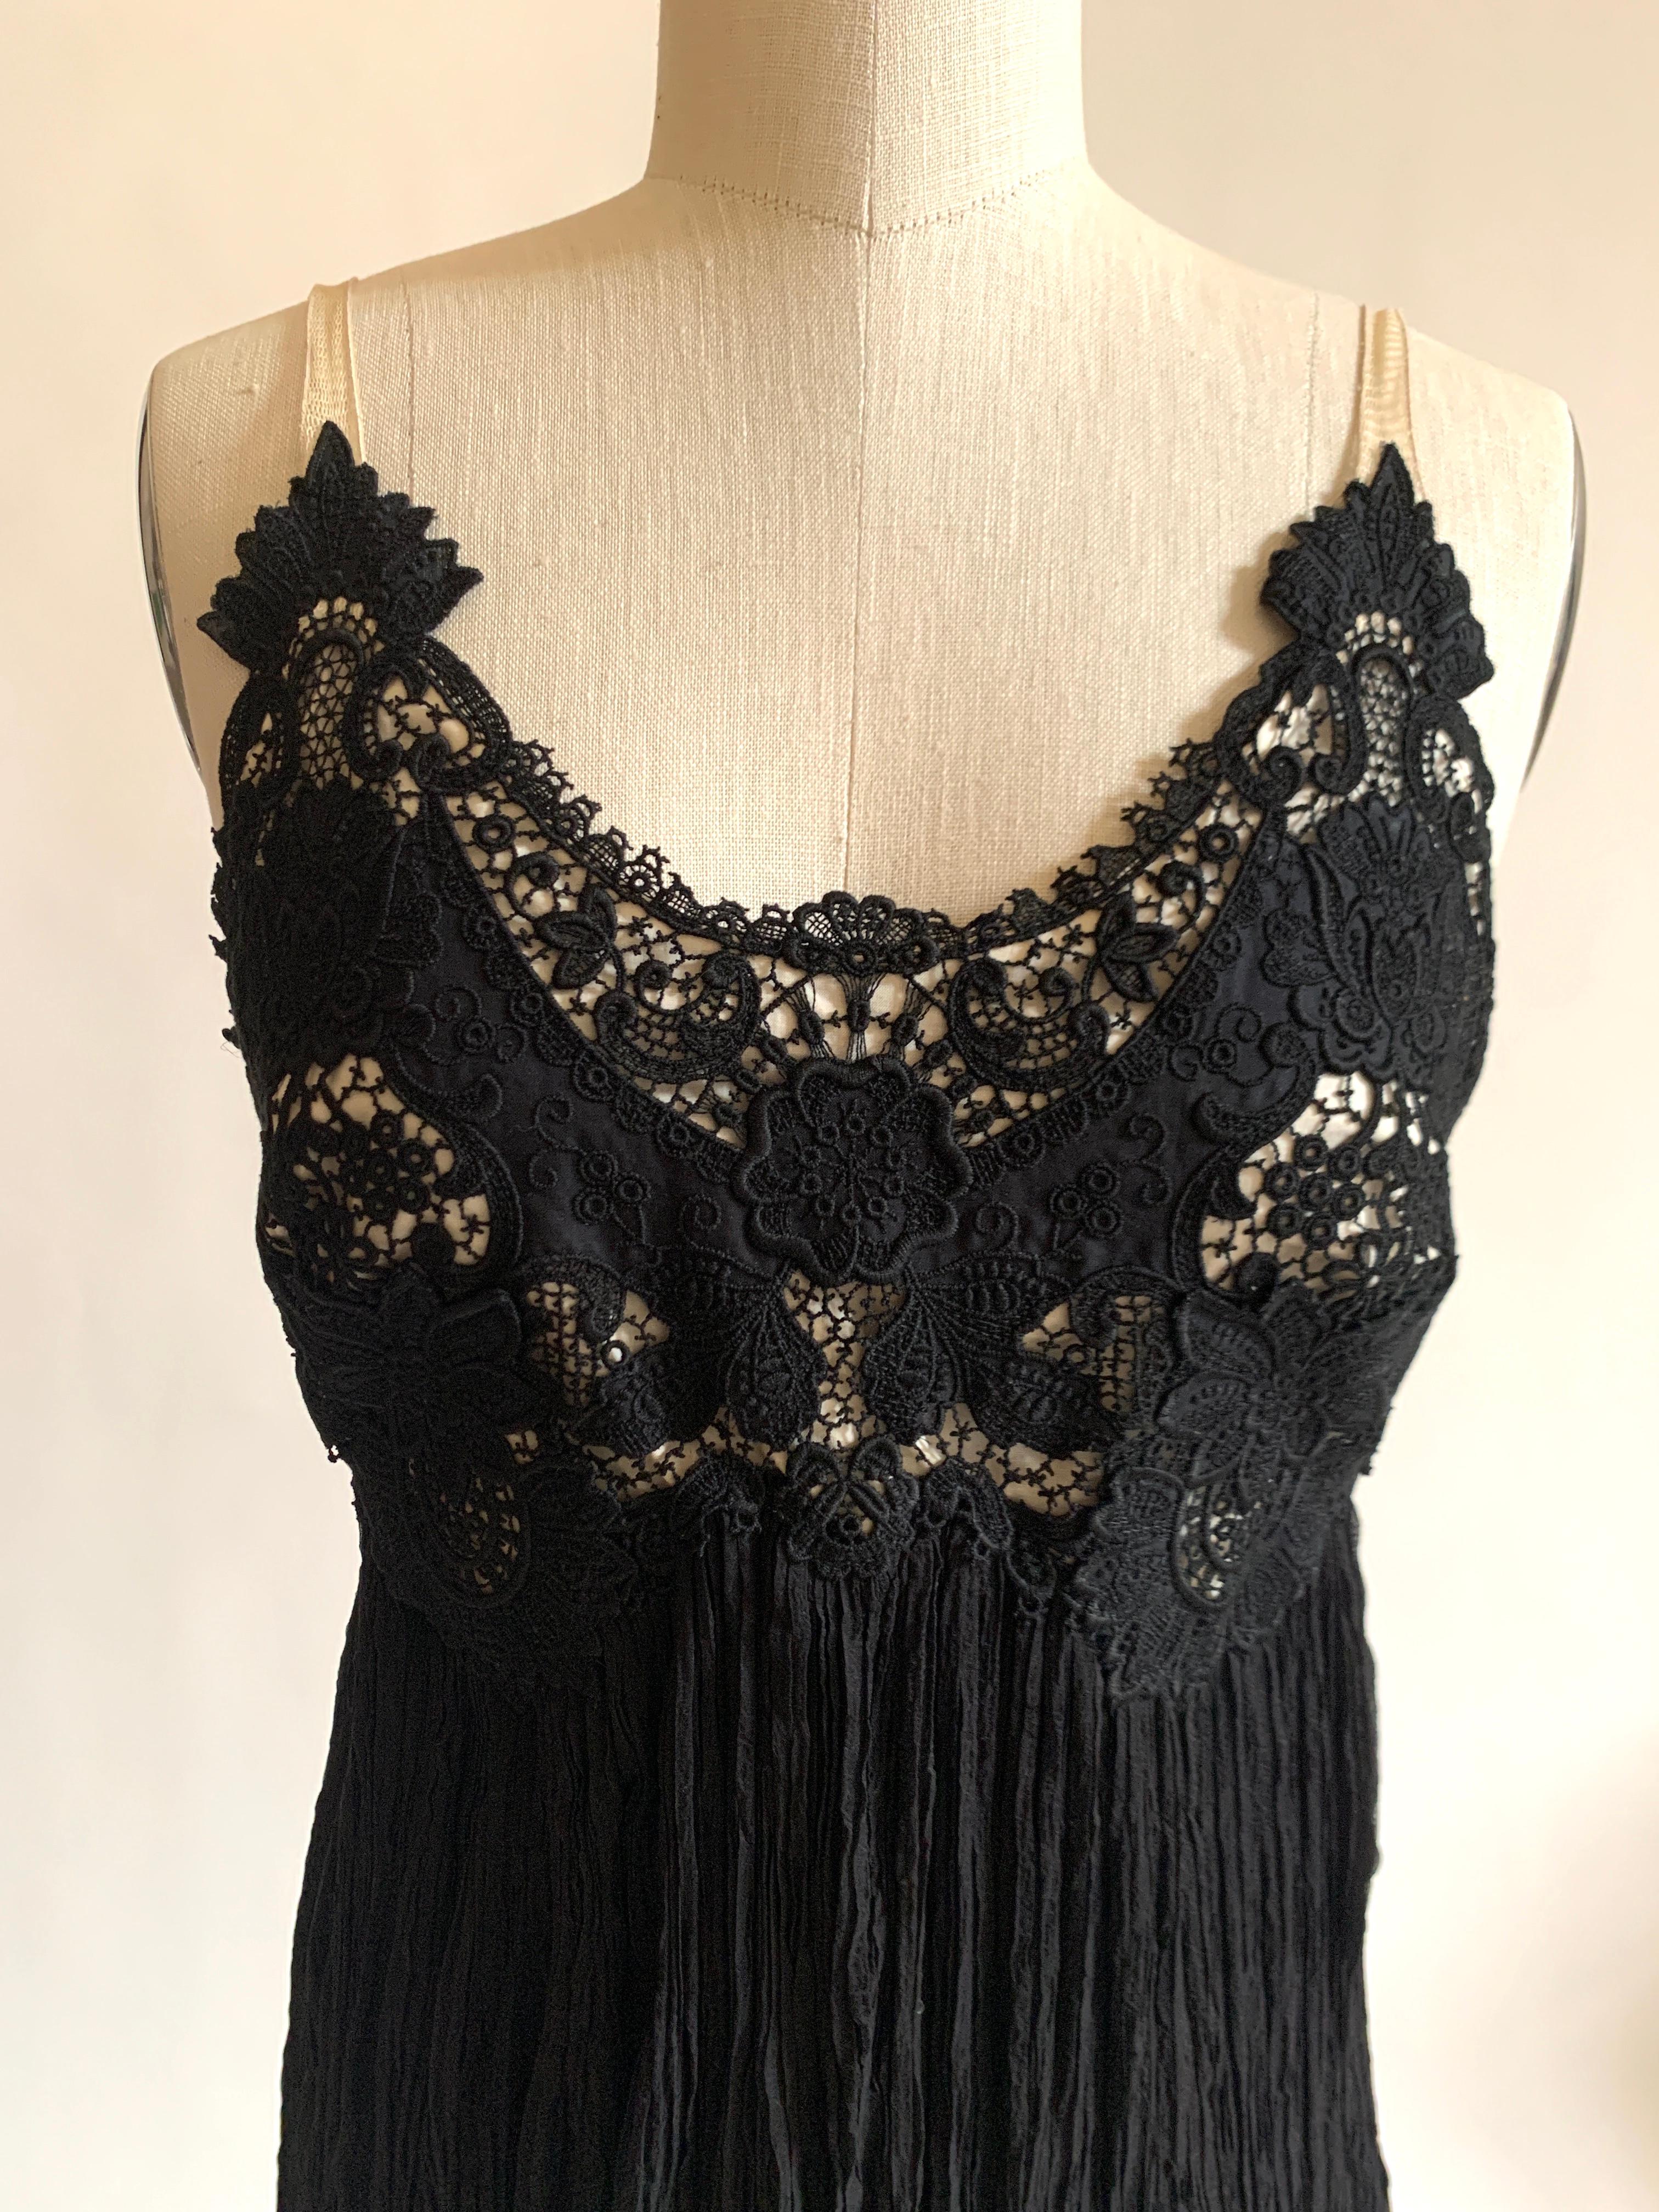 Alexander McQueen 2005 Black Lace and Crinkle Pleat Silk Dress In Excellent Condition For Sale In San Francisco, CA